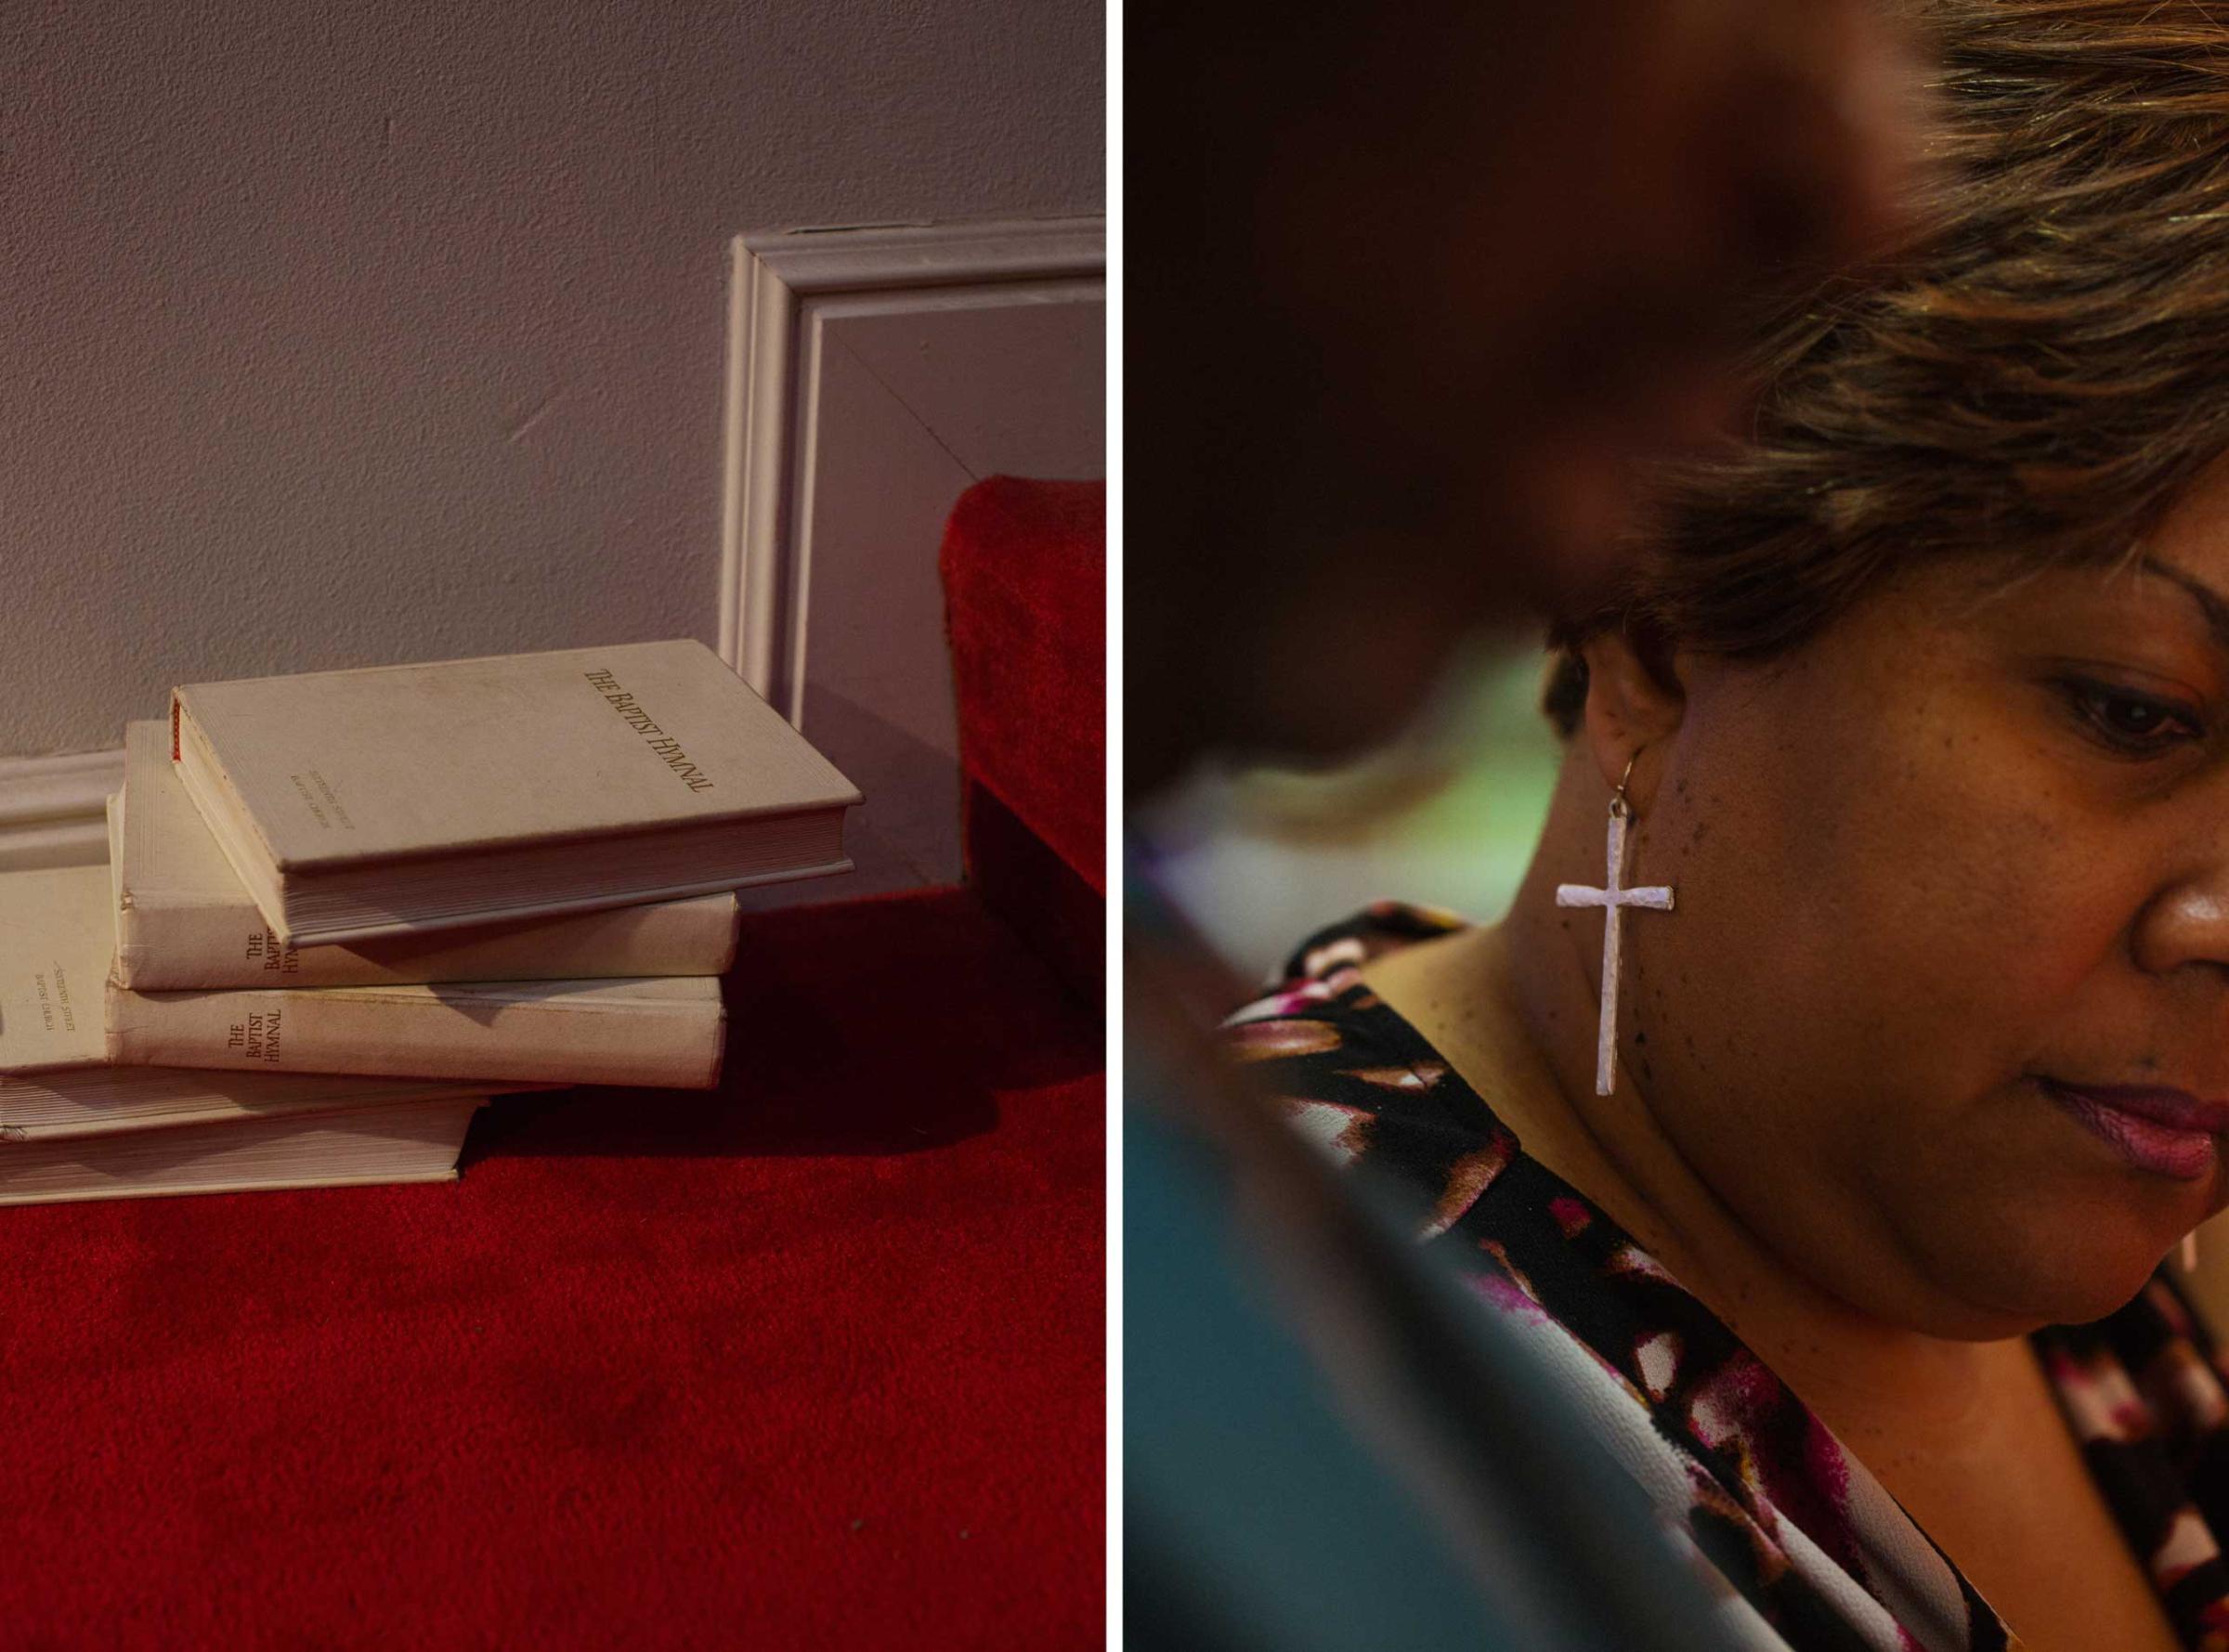 Left: A stack of hymnals at 16th Street Baptist Church. Right: A woman wears cross earrings during a service at 16th Street Baptist Church in Birmingham, Ala. on March 22, 2015.